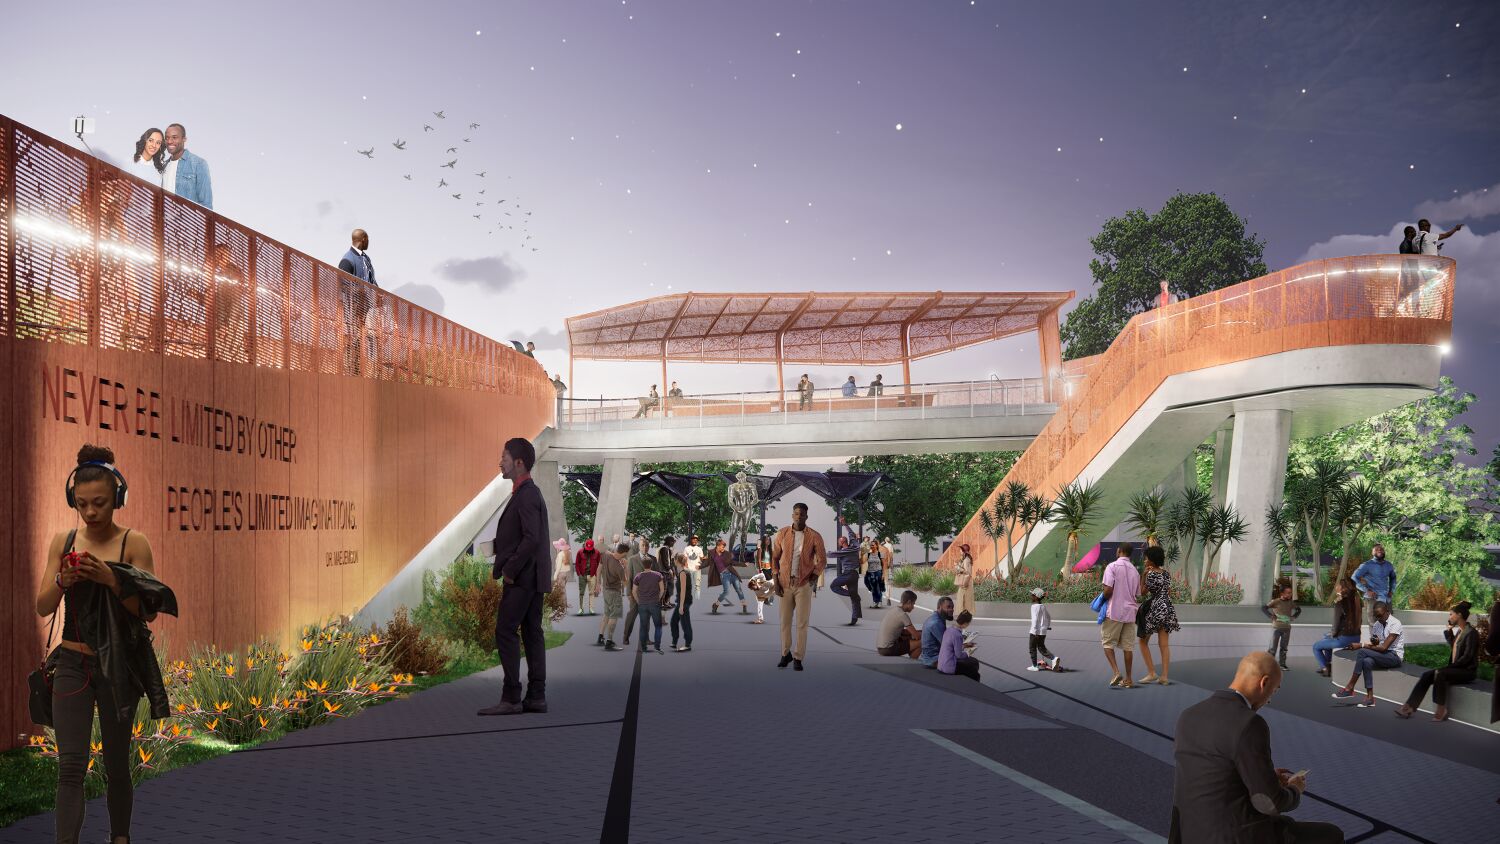 Destination Crenshaw to unveil Sankofa Park, the project's 'jewel in the crown,' this fall